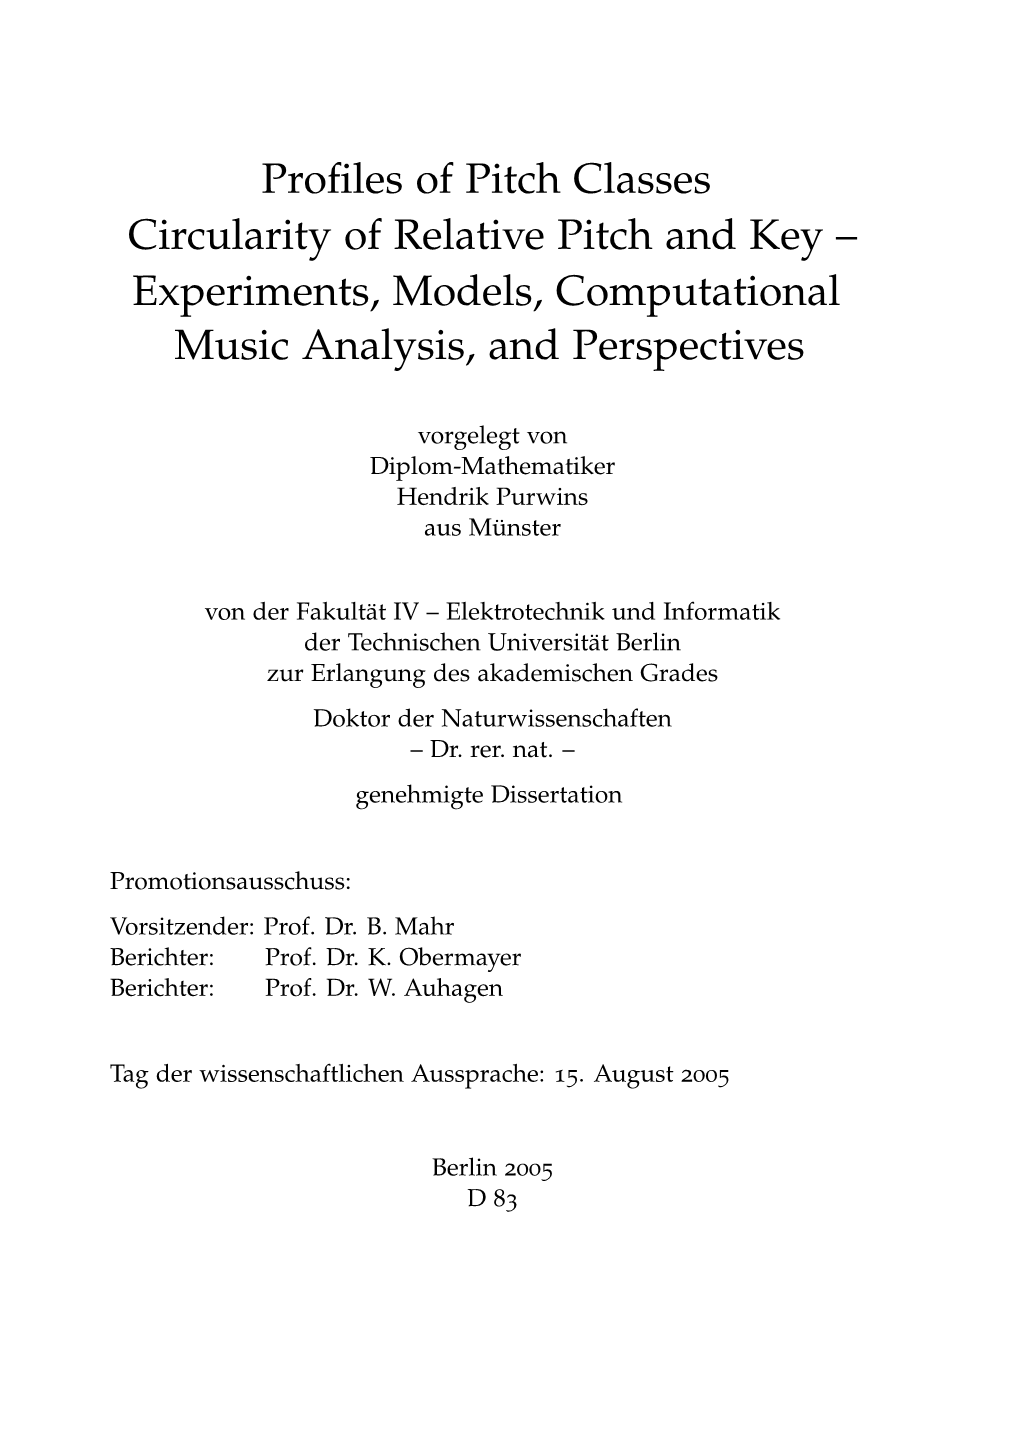 Profiles of Pitch Classes Circularity of Relative Pitch And